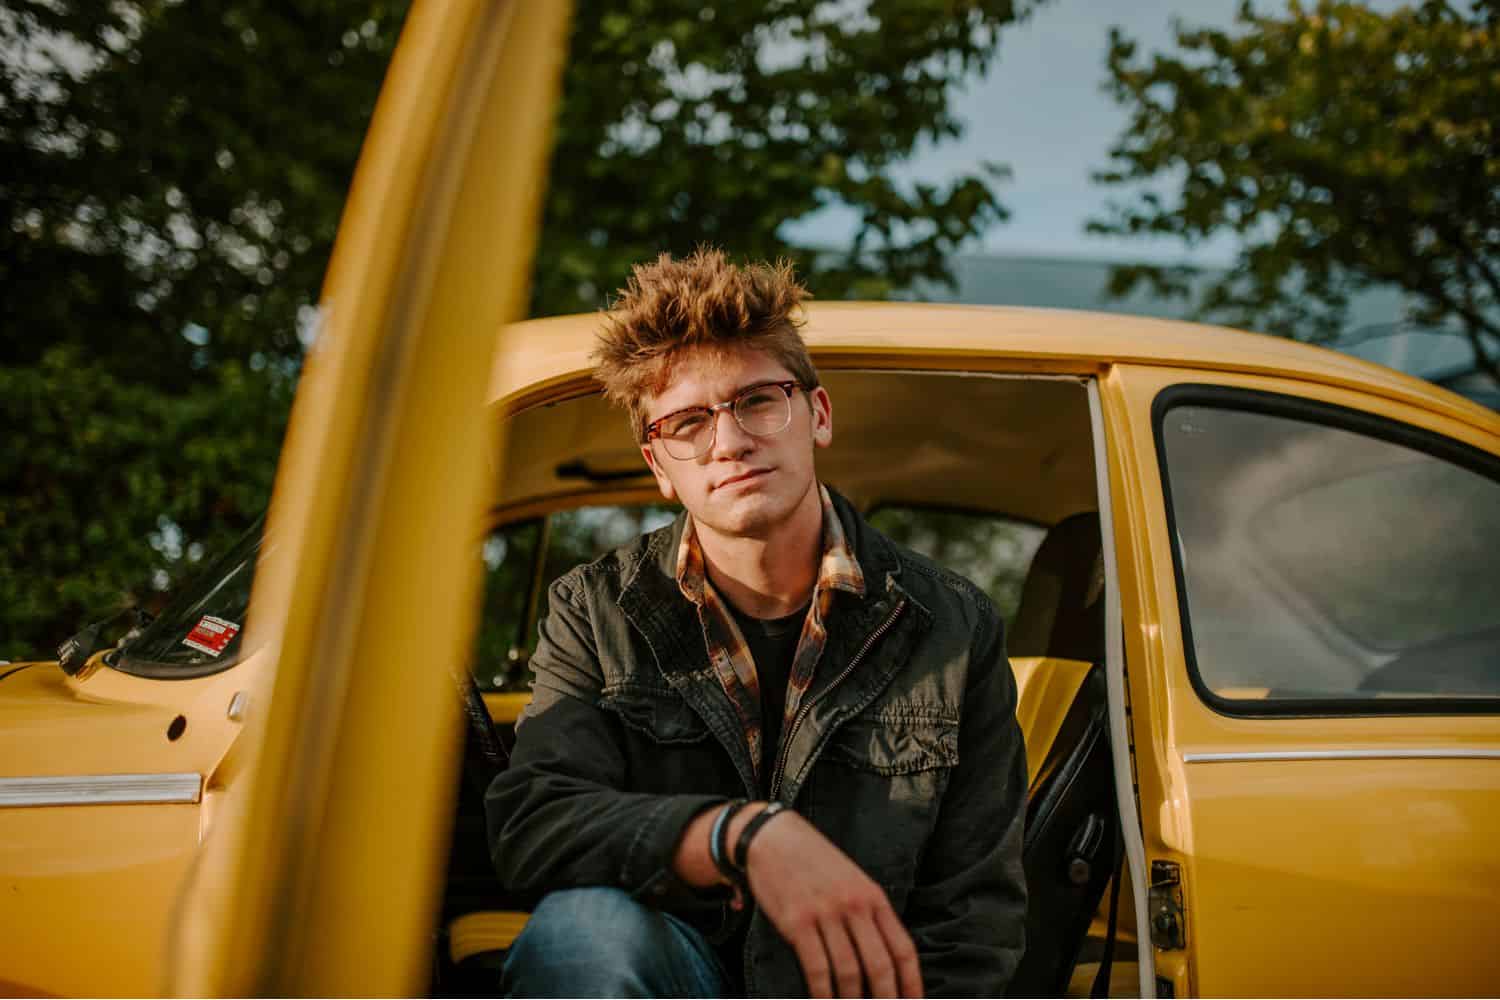 A high school senior guy sits in the open doorway of a bright yellow vintage car 